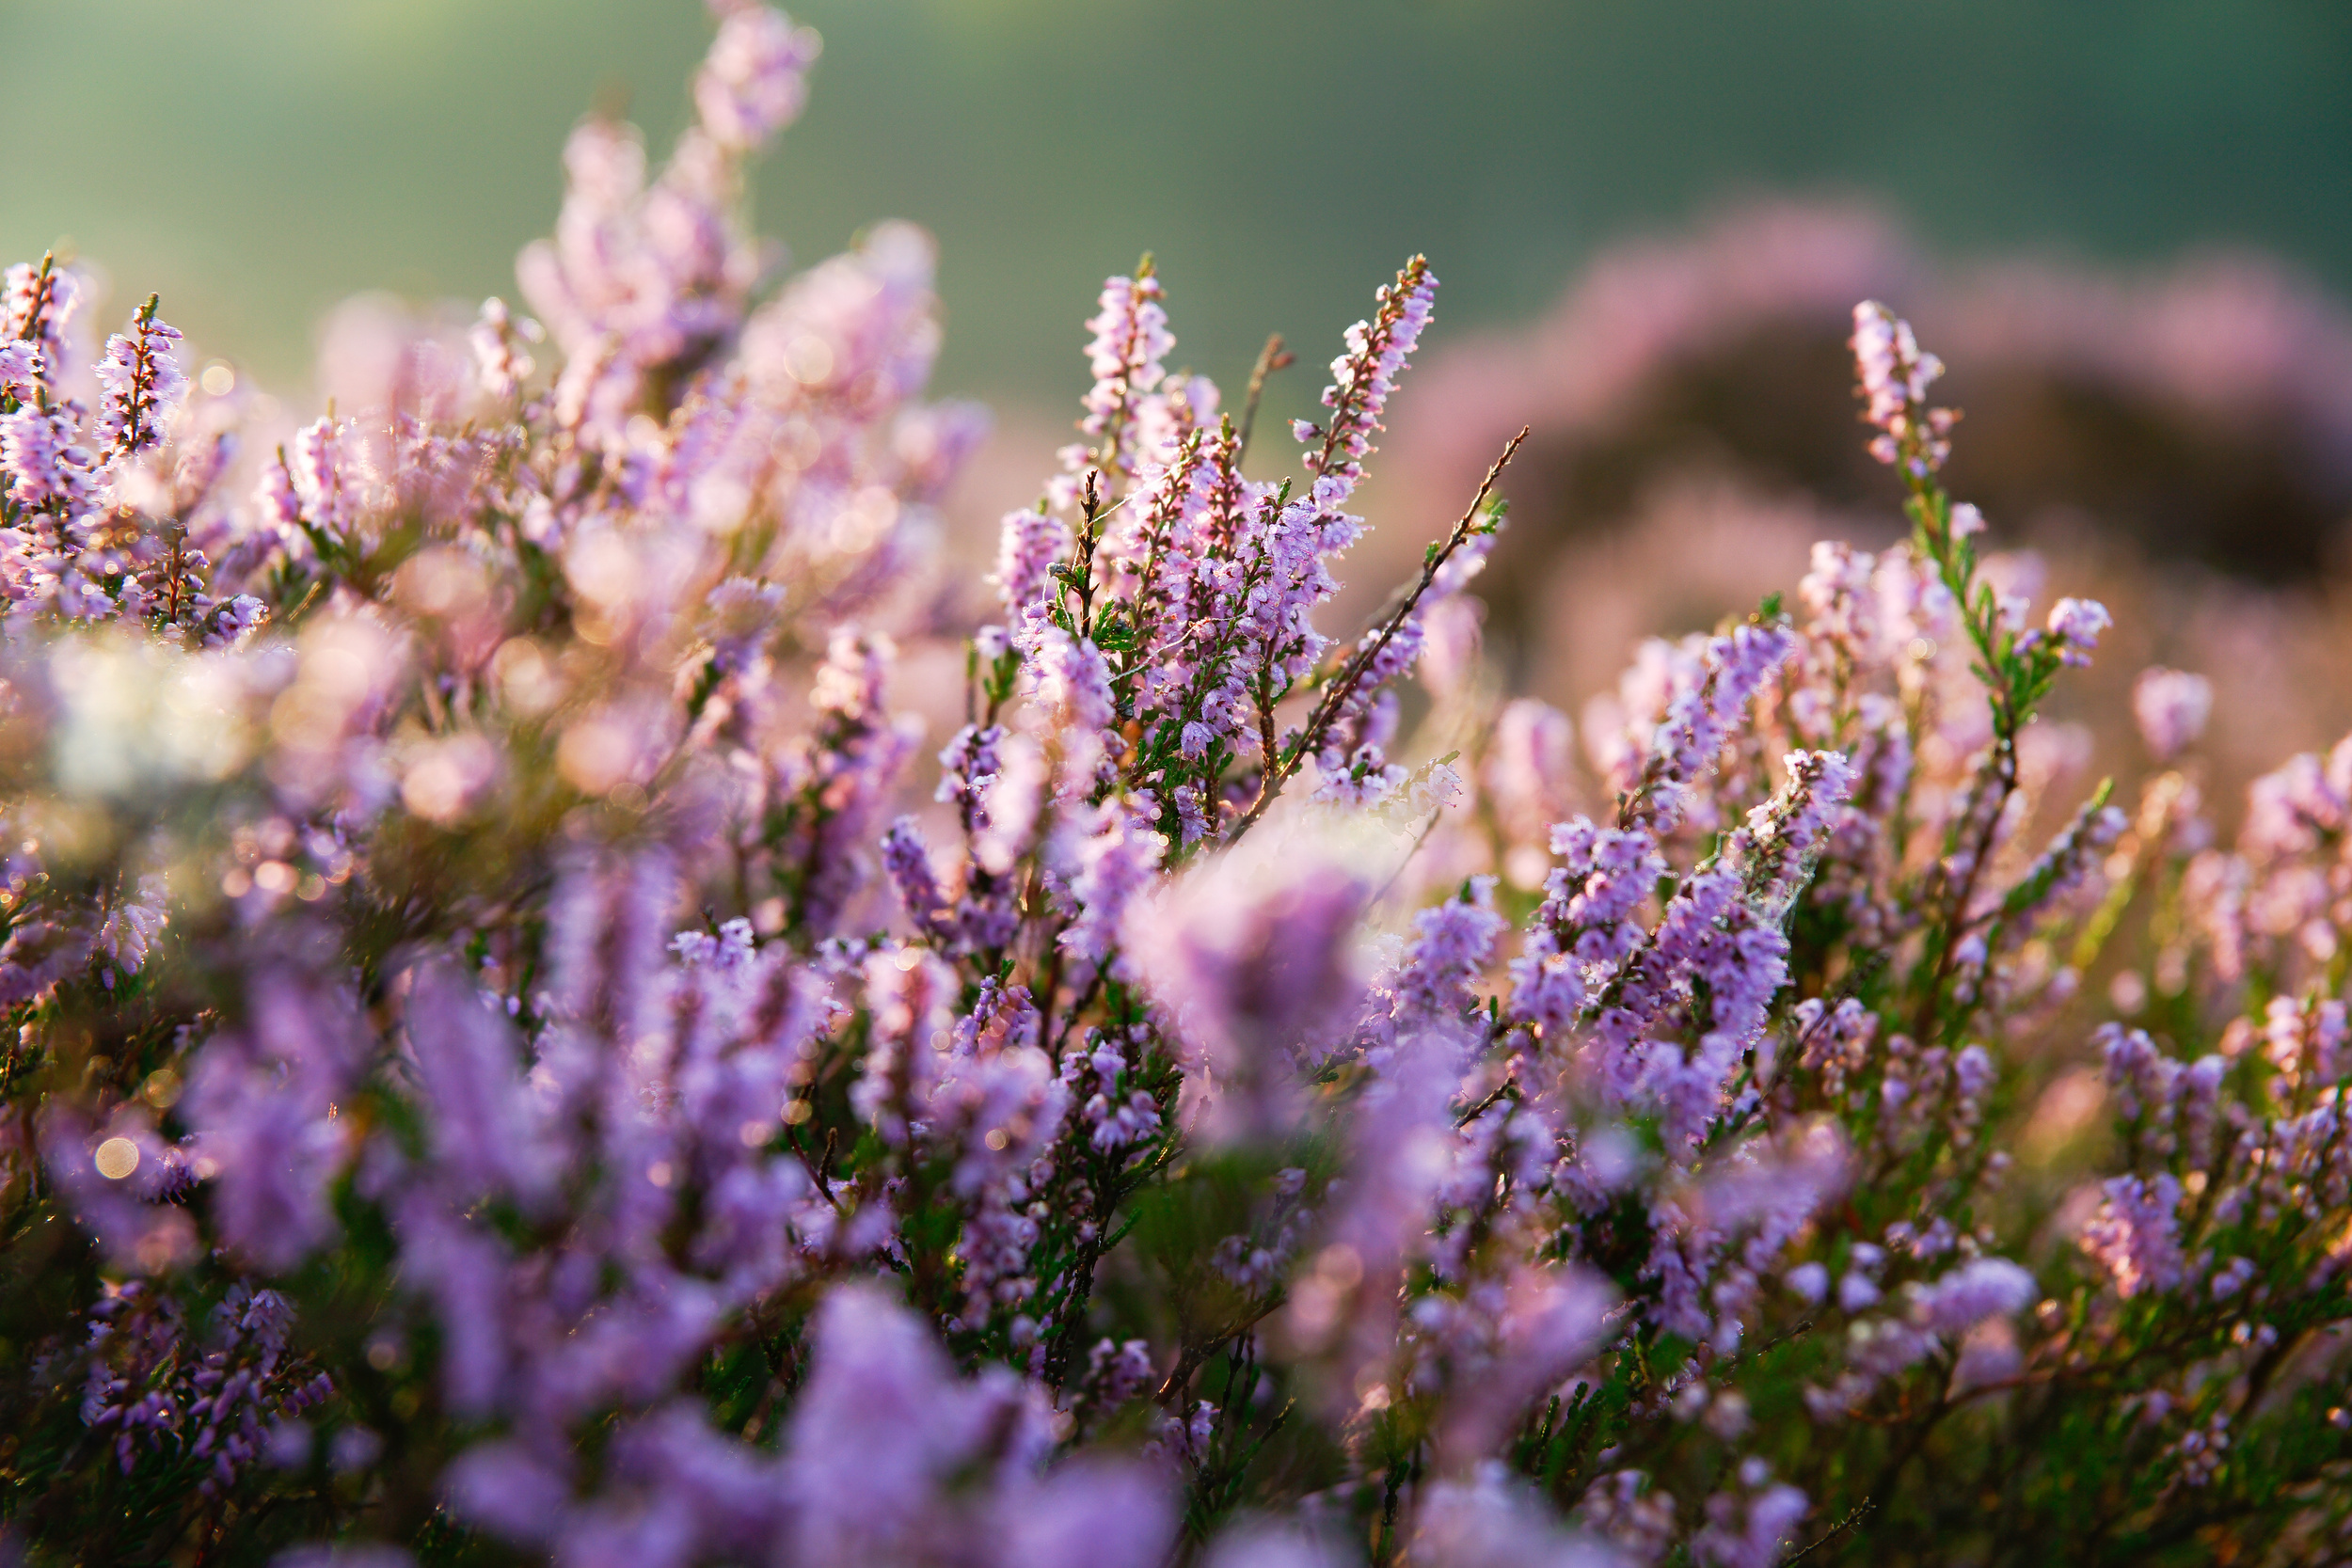 <p>In the far north of Denmark, spring arrives a bit later. But when it does, heather sprouts up to give the entire region a whimsical feel that is perfect for long walks as the seasons change.</p><p><a href='https://www.msn.com/en-us/community/channel/vid-cj9pqbr0vn9in2b6ddcd8sfgpfq6x6utp44fssrv6mc2gtybw0us'>Did you enjoy this slideshow? Follow us on MSN to see more of our exclusive lifestyle content.</a></p>